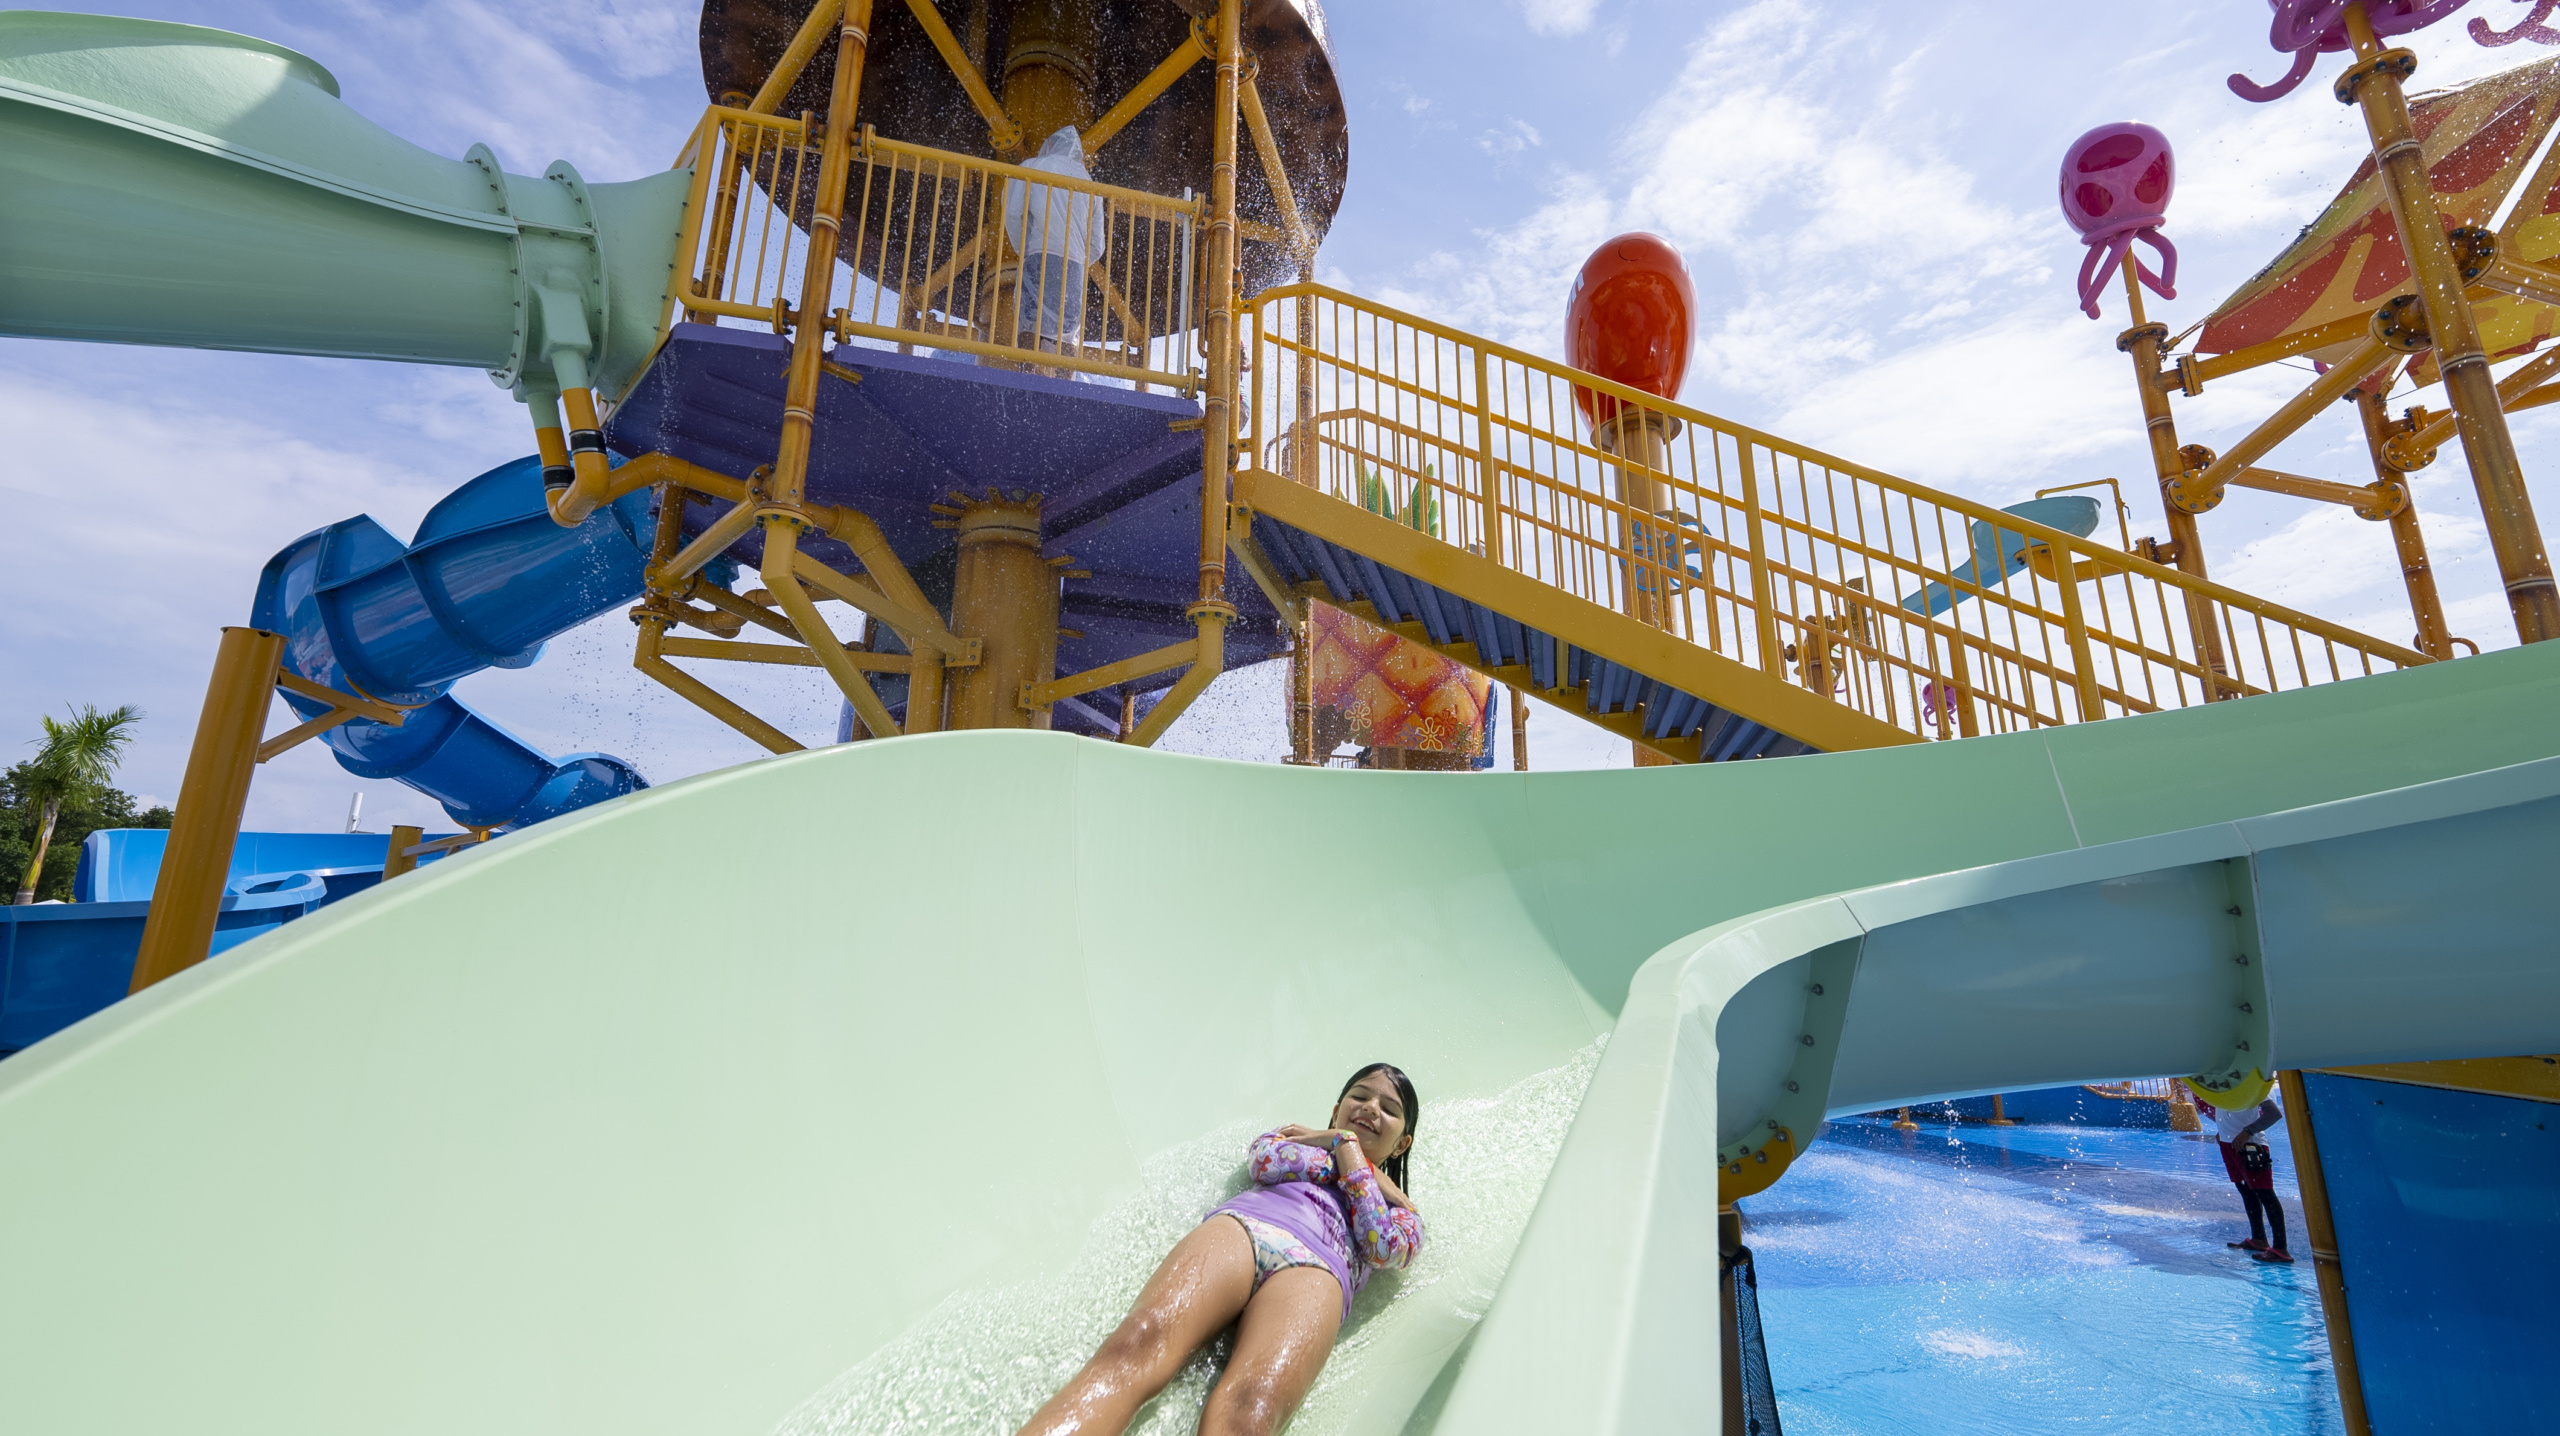 RainFortress 5, AquaNick at Nickelodeon Hotel and Resort, Cancun, Mexico